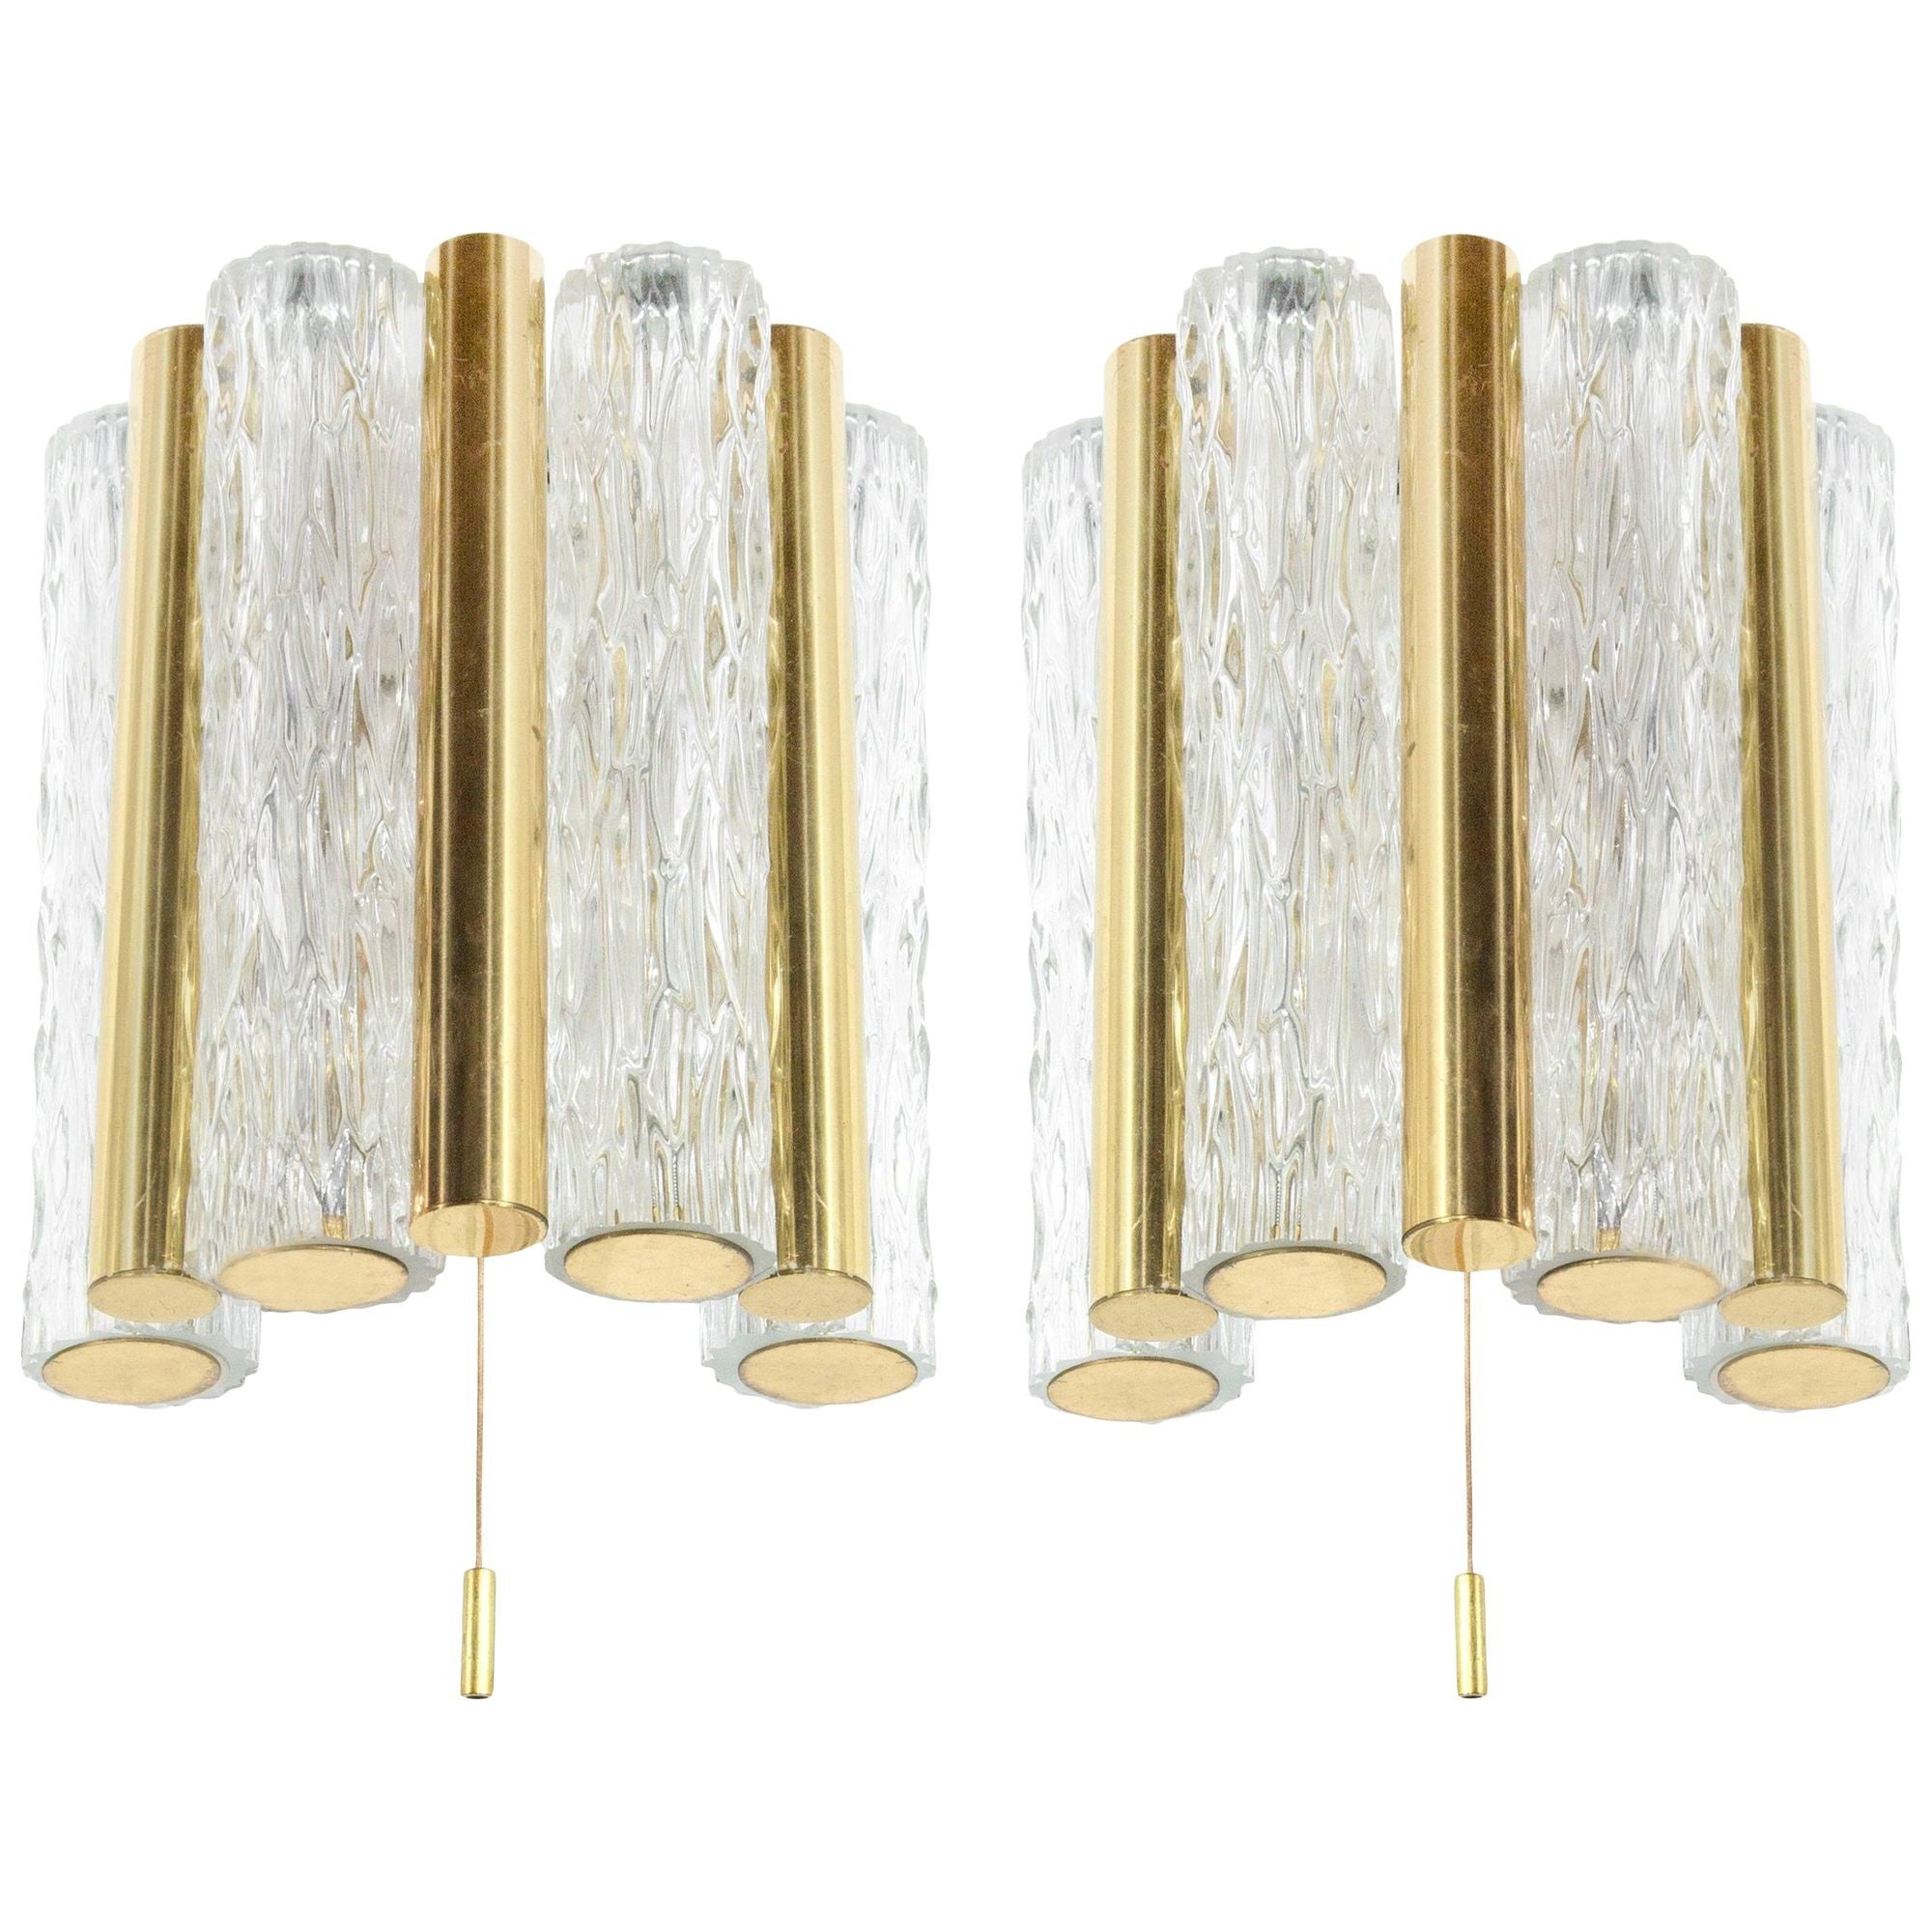 Set of Murano Glass and Brass Sconces by Doria Leuchten, Germany, C. 1960s For Sale